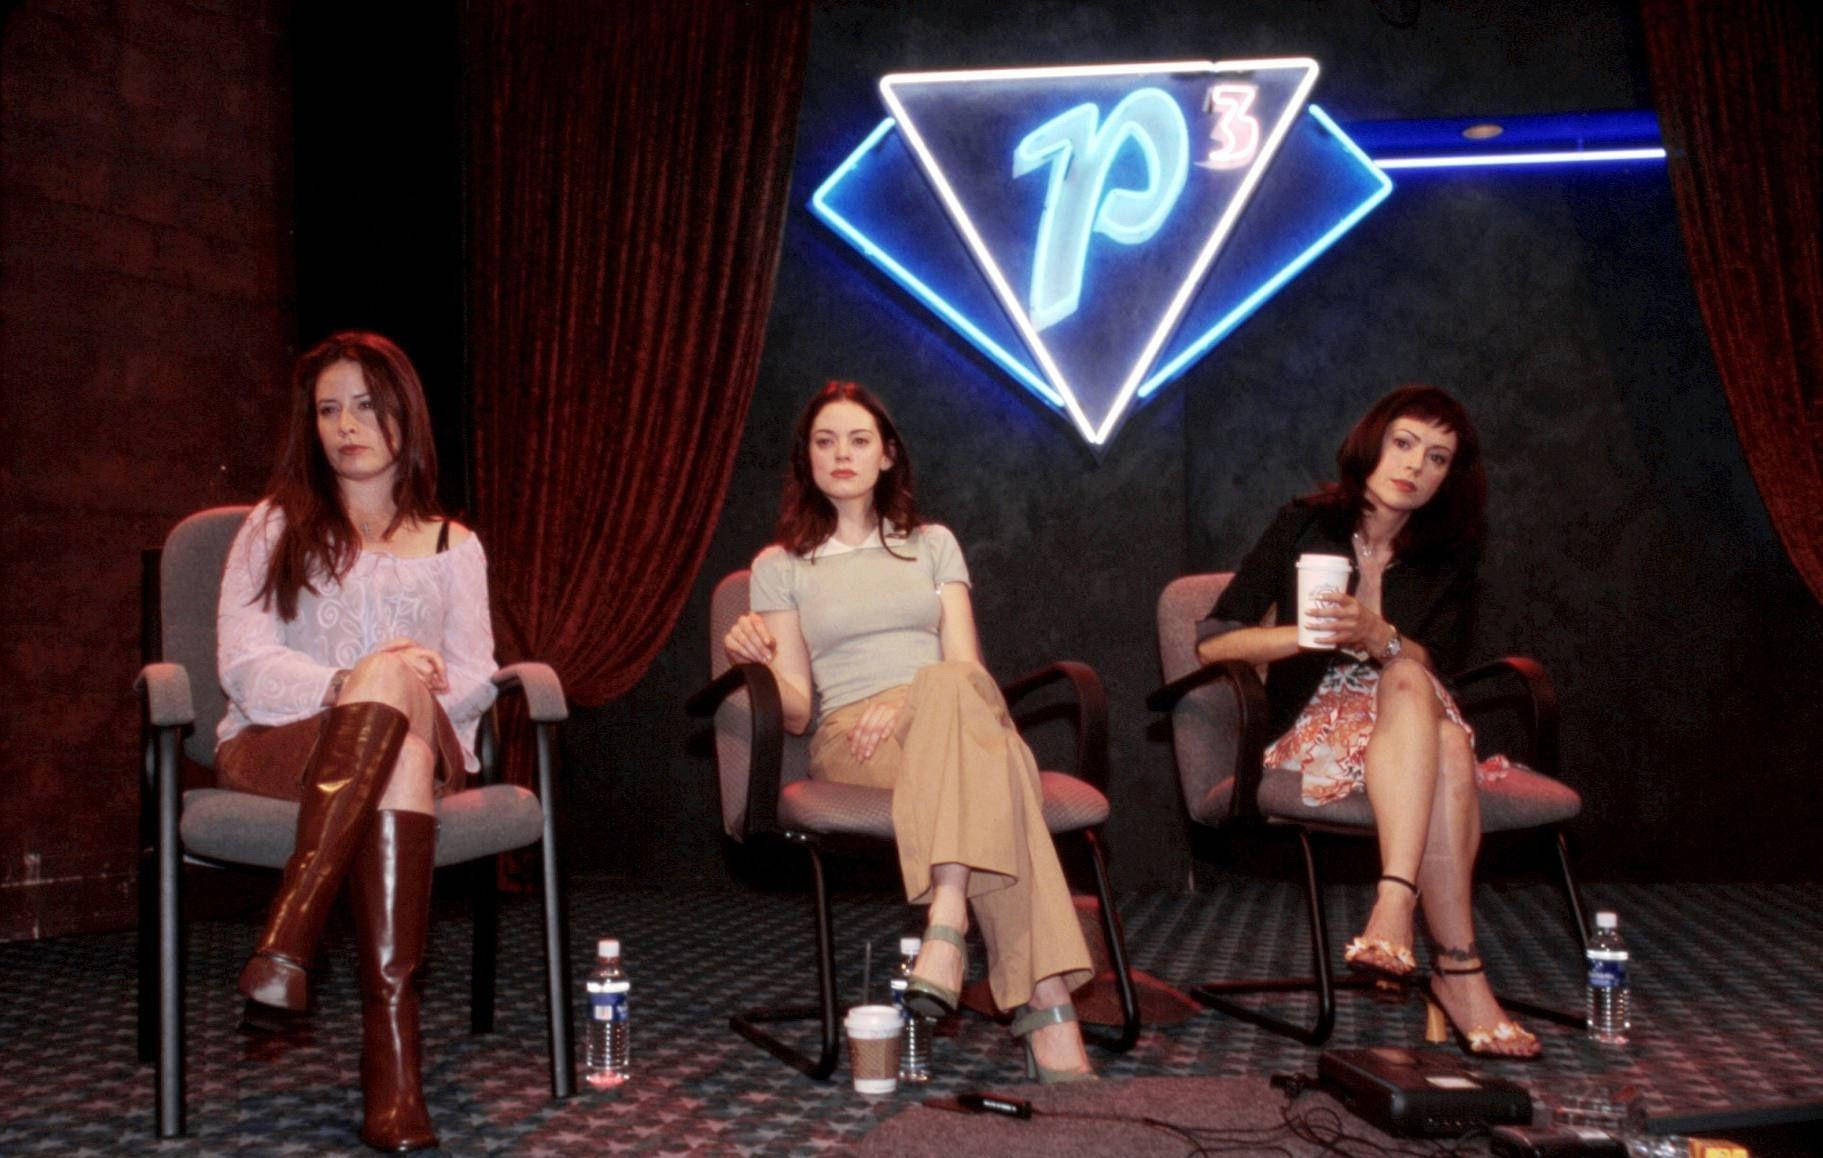 Charmed TV Show - Main Characters During Press Conference Wallpaper